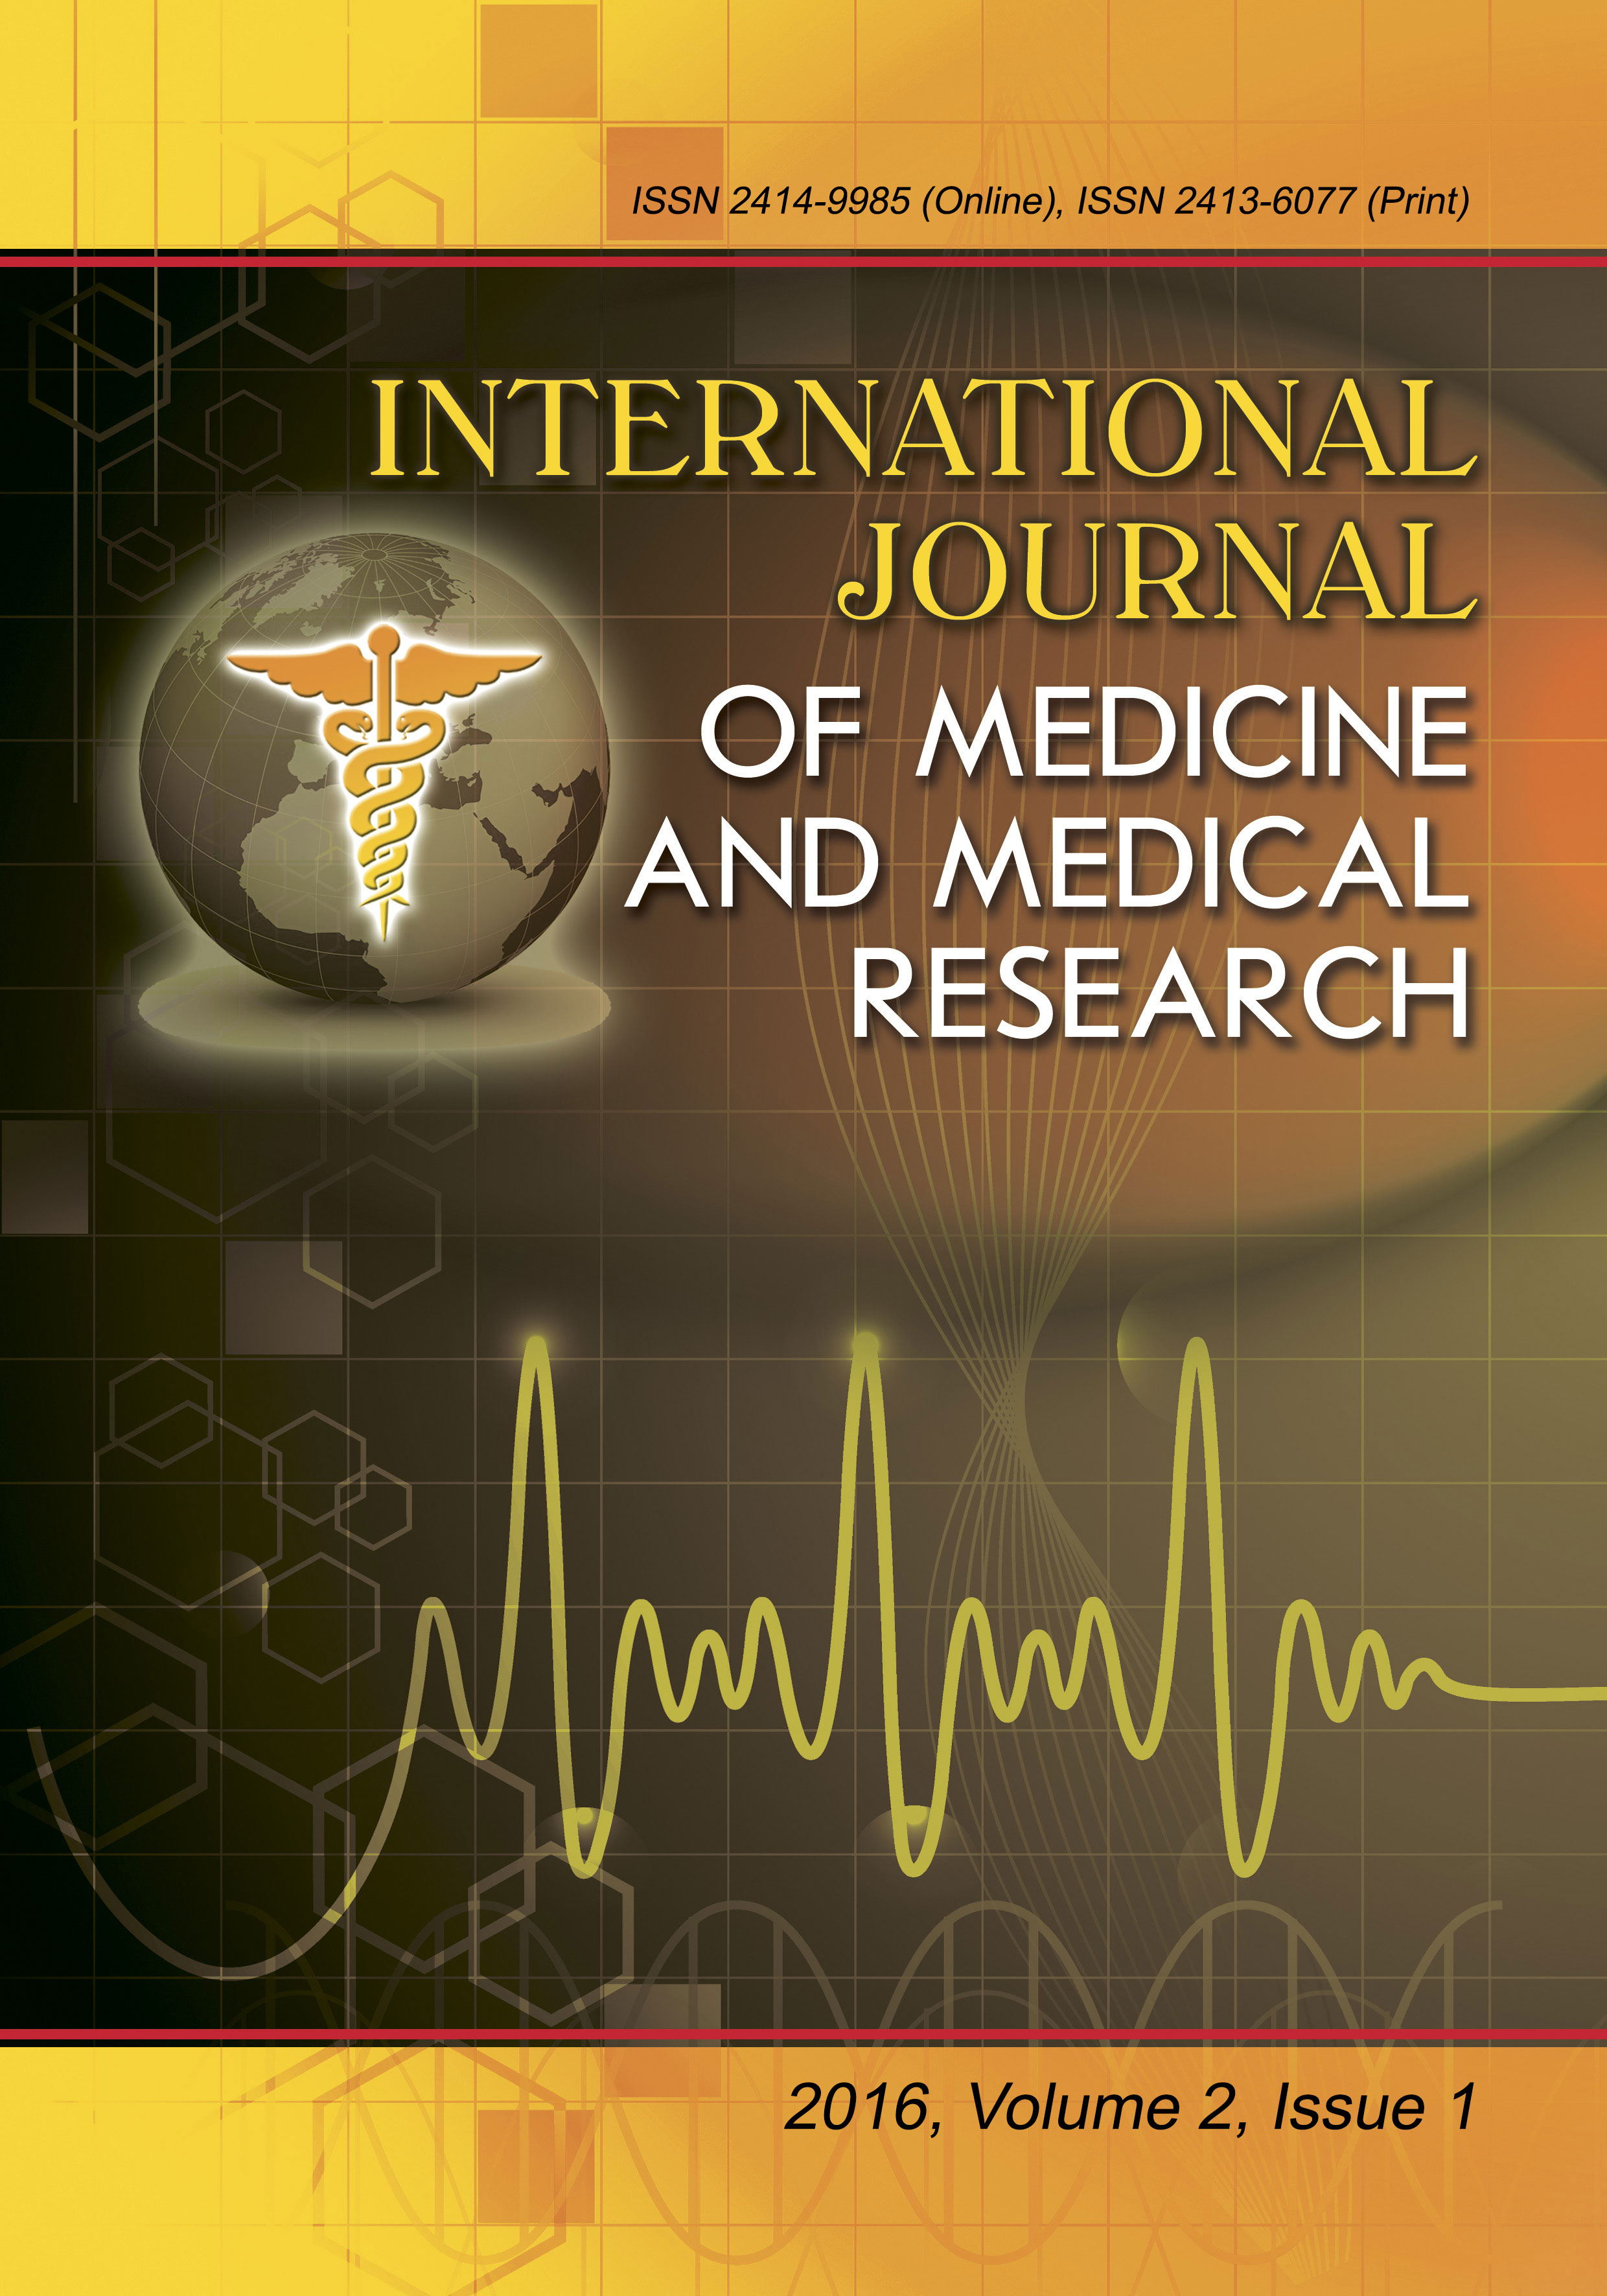 					View Vol. 2 No. 1 (2016): International Journal of Medicine and Medical Research
				